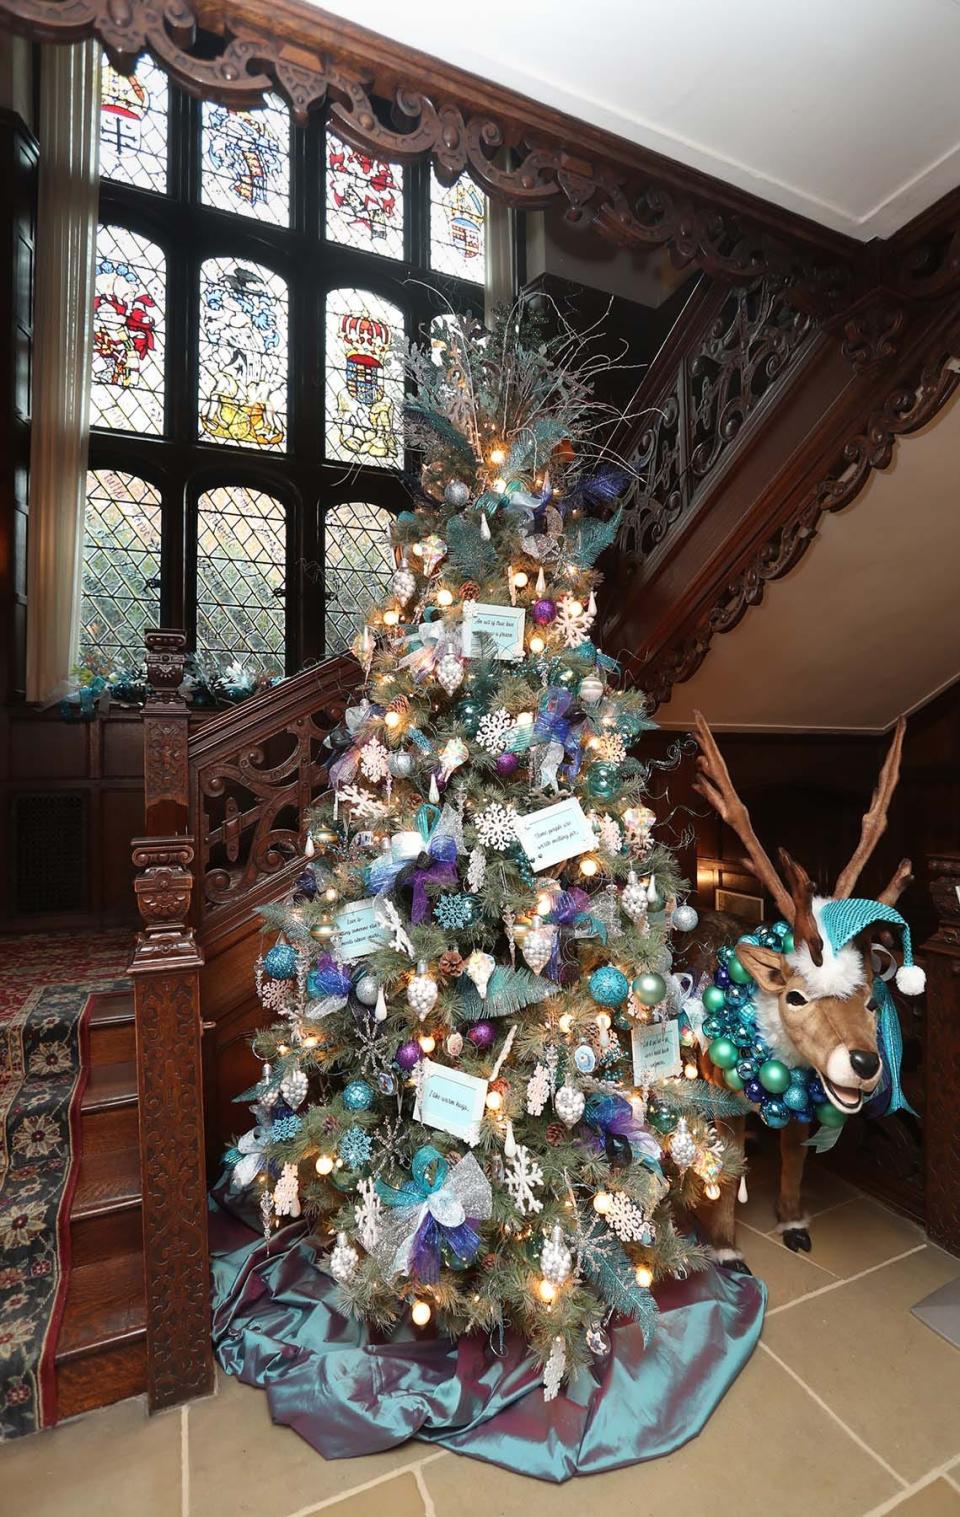 A tree decorated to the theme of the movie "Frozen" is on display at the Grand Staircase inside the Manor House.